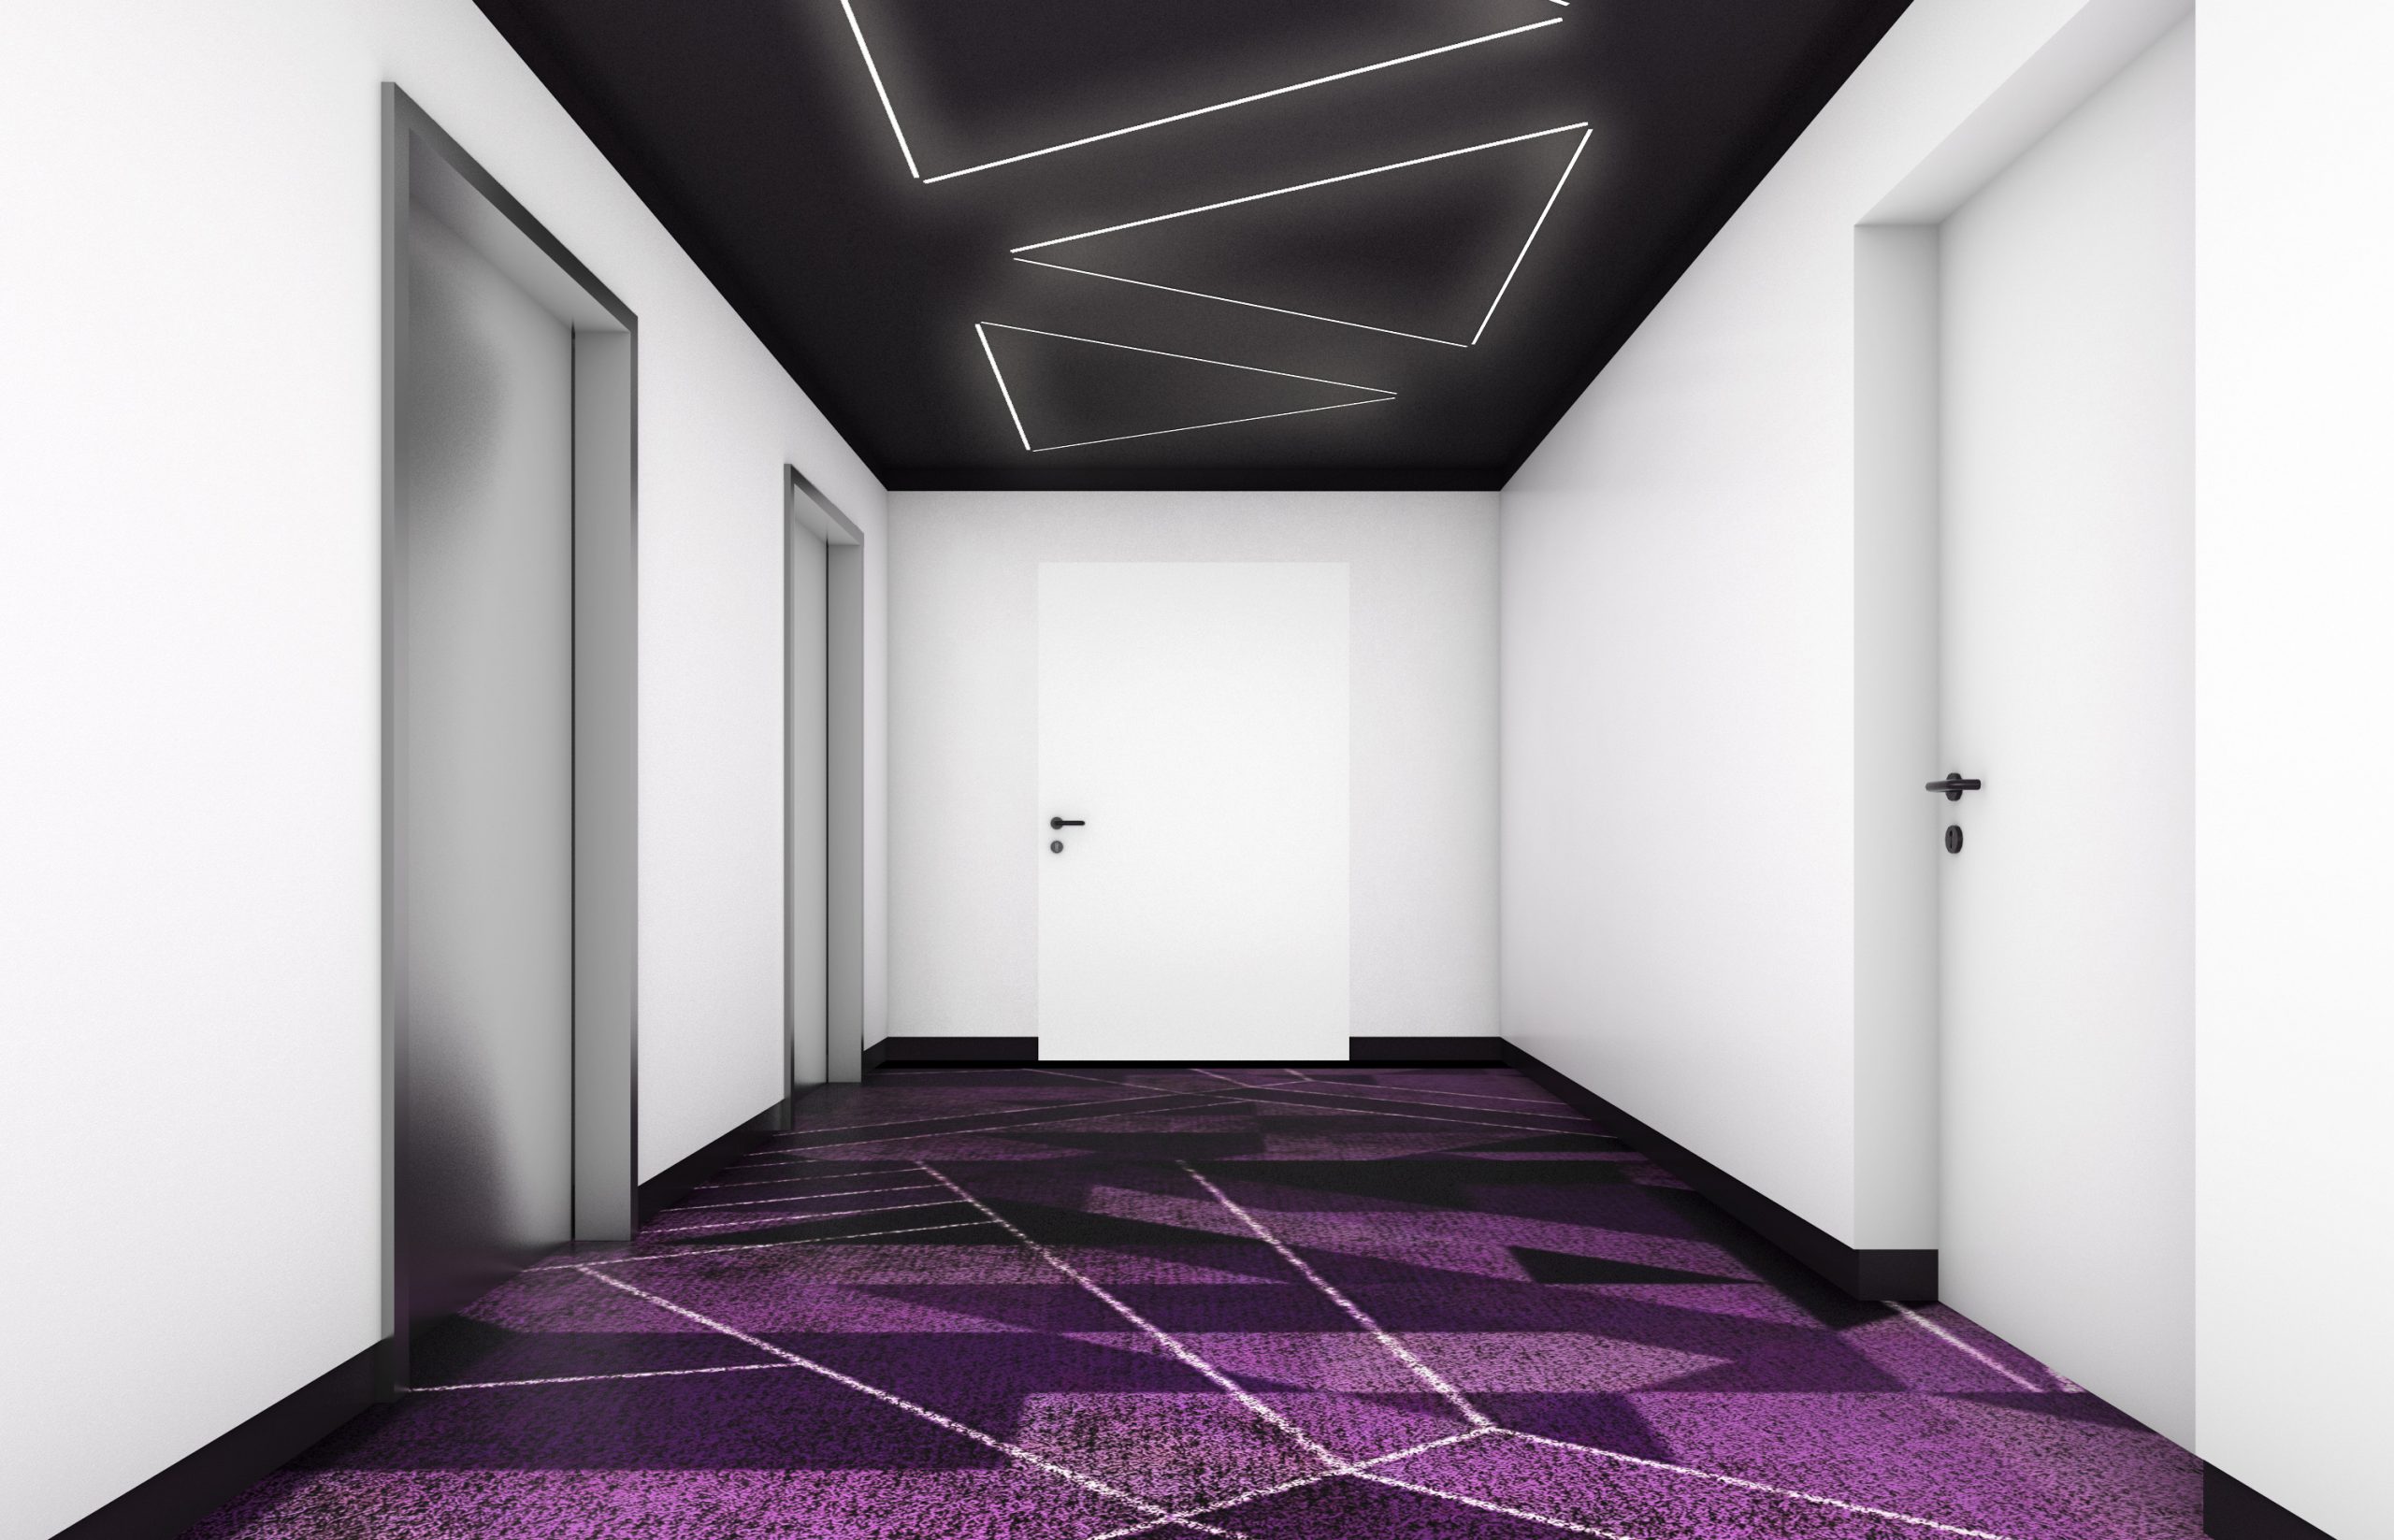 Yotel experience spaces - Gitaly contract